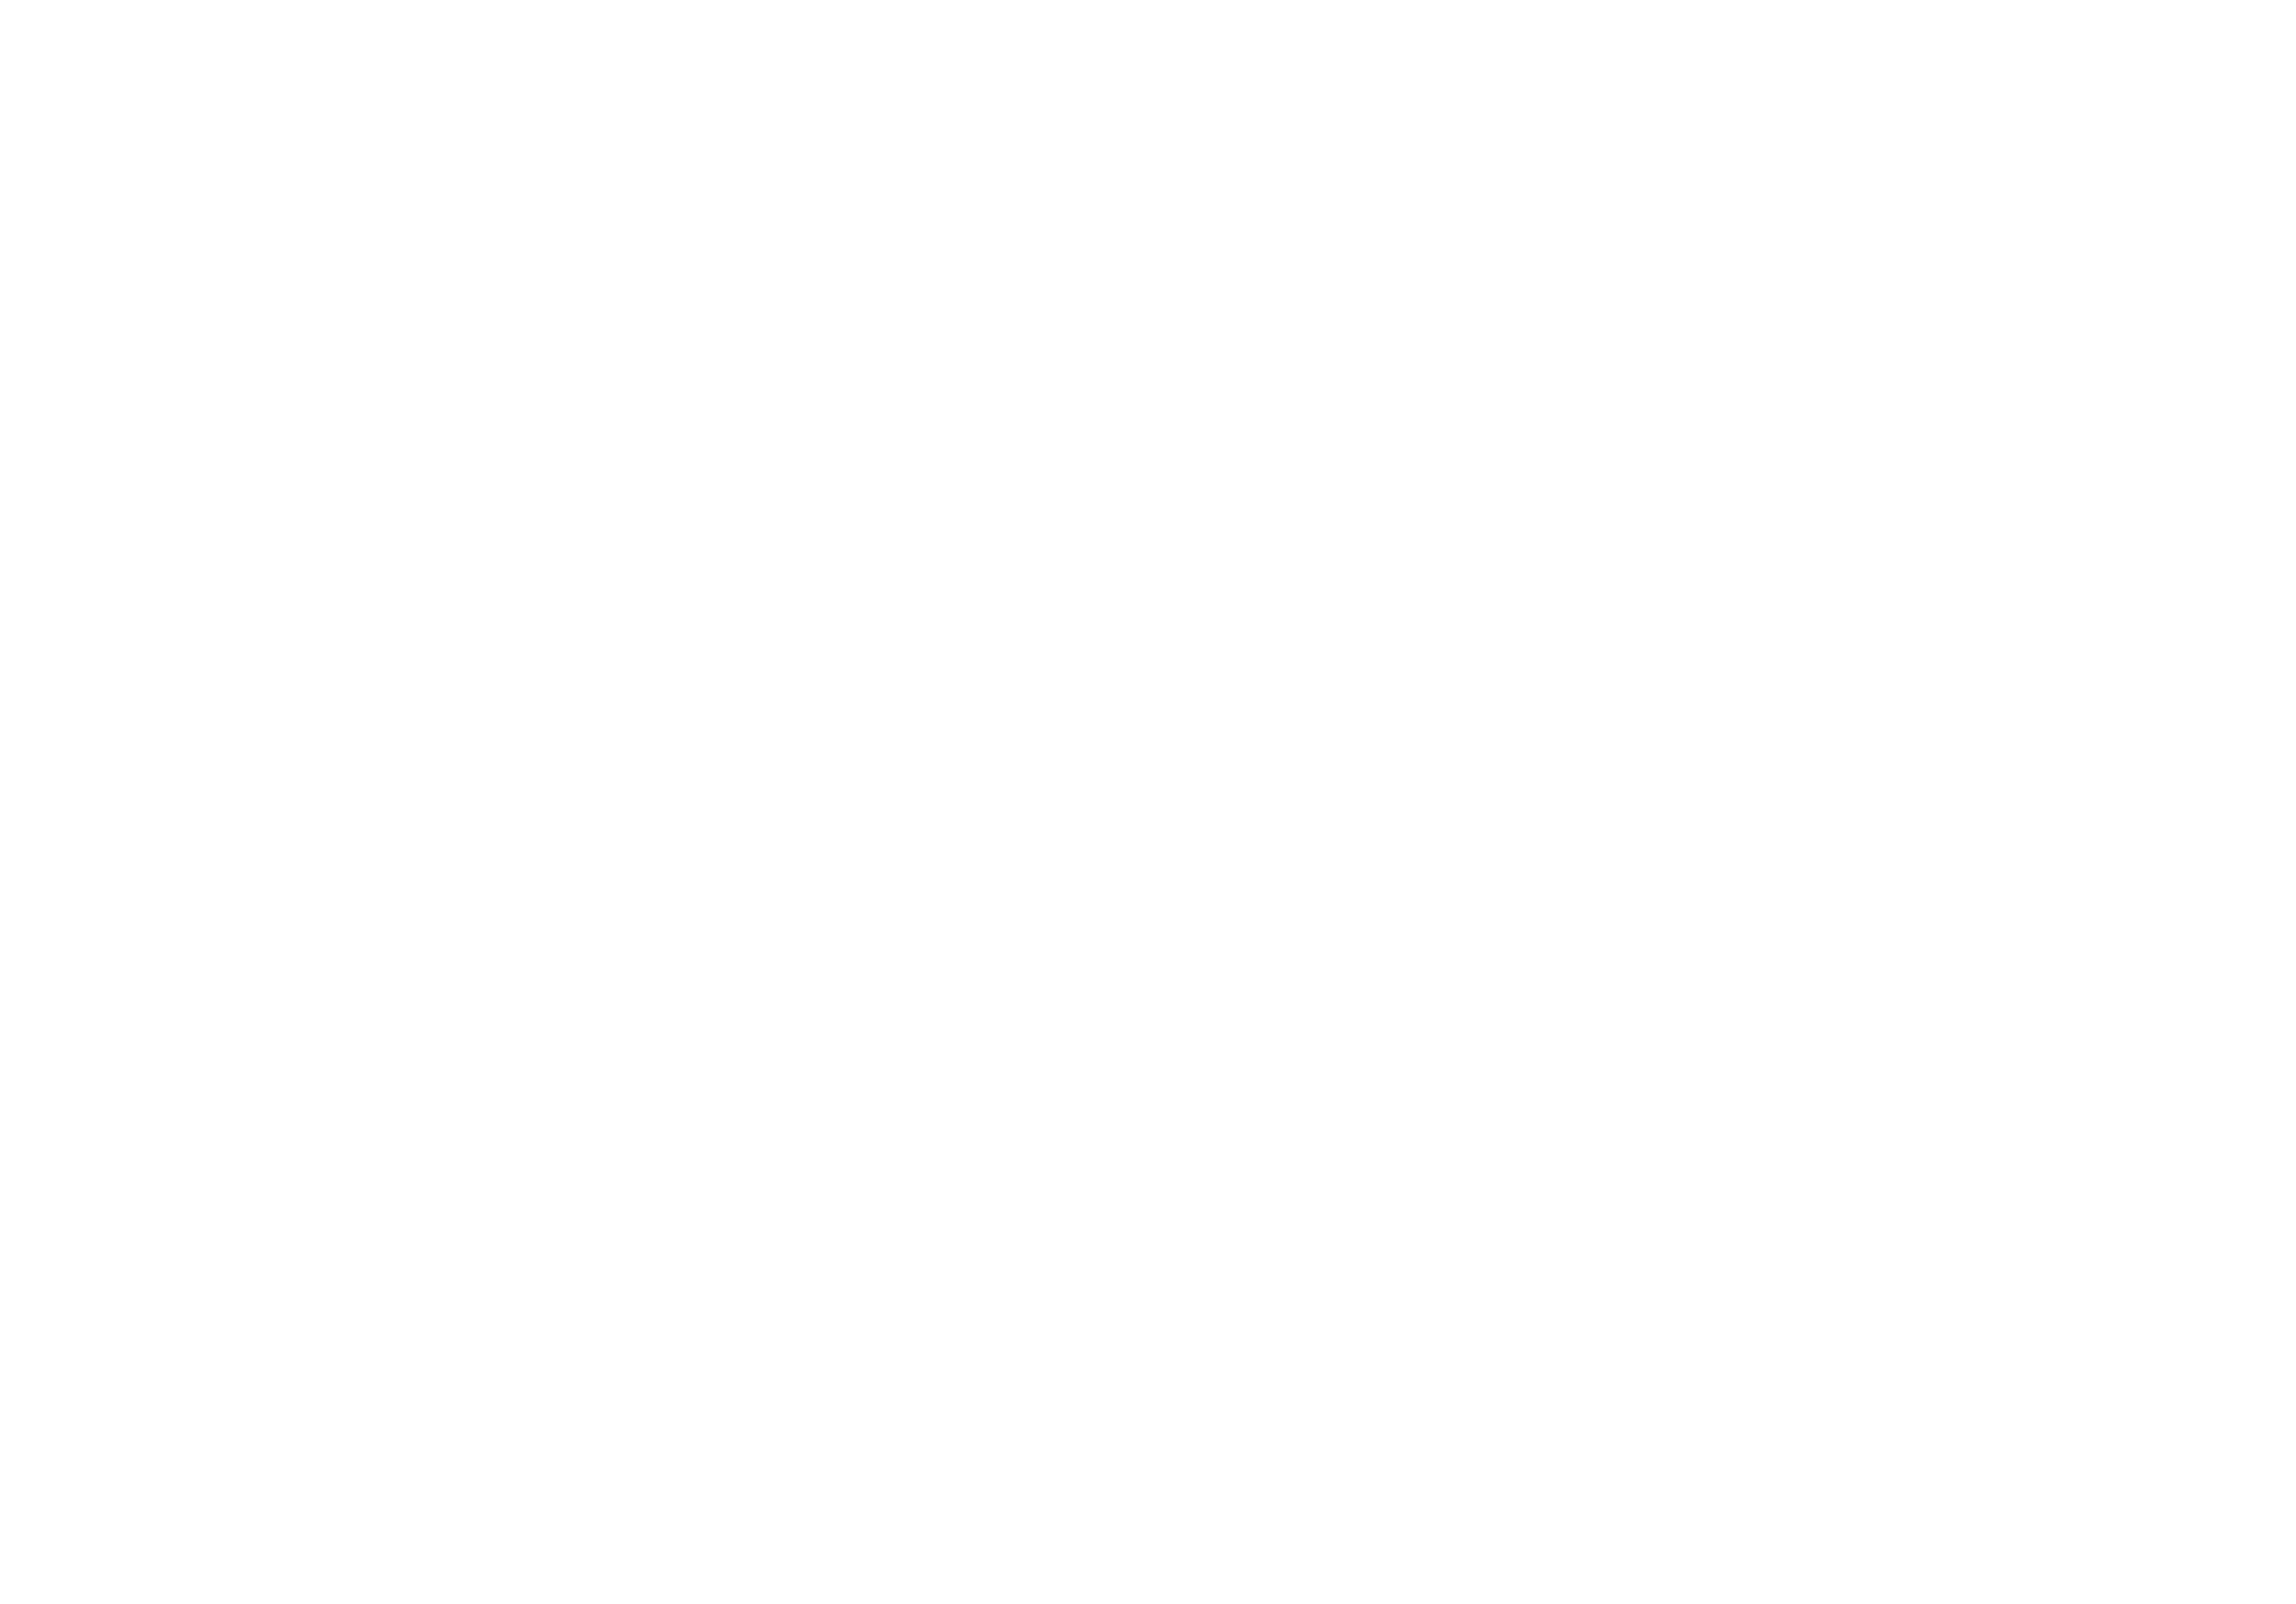 Kaiapoi Food Forest